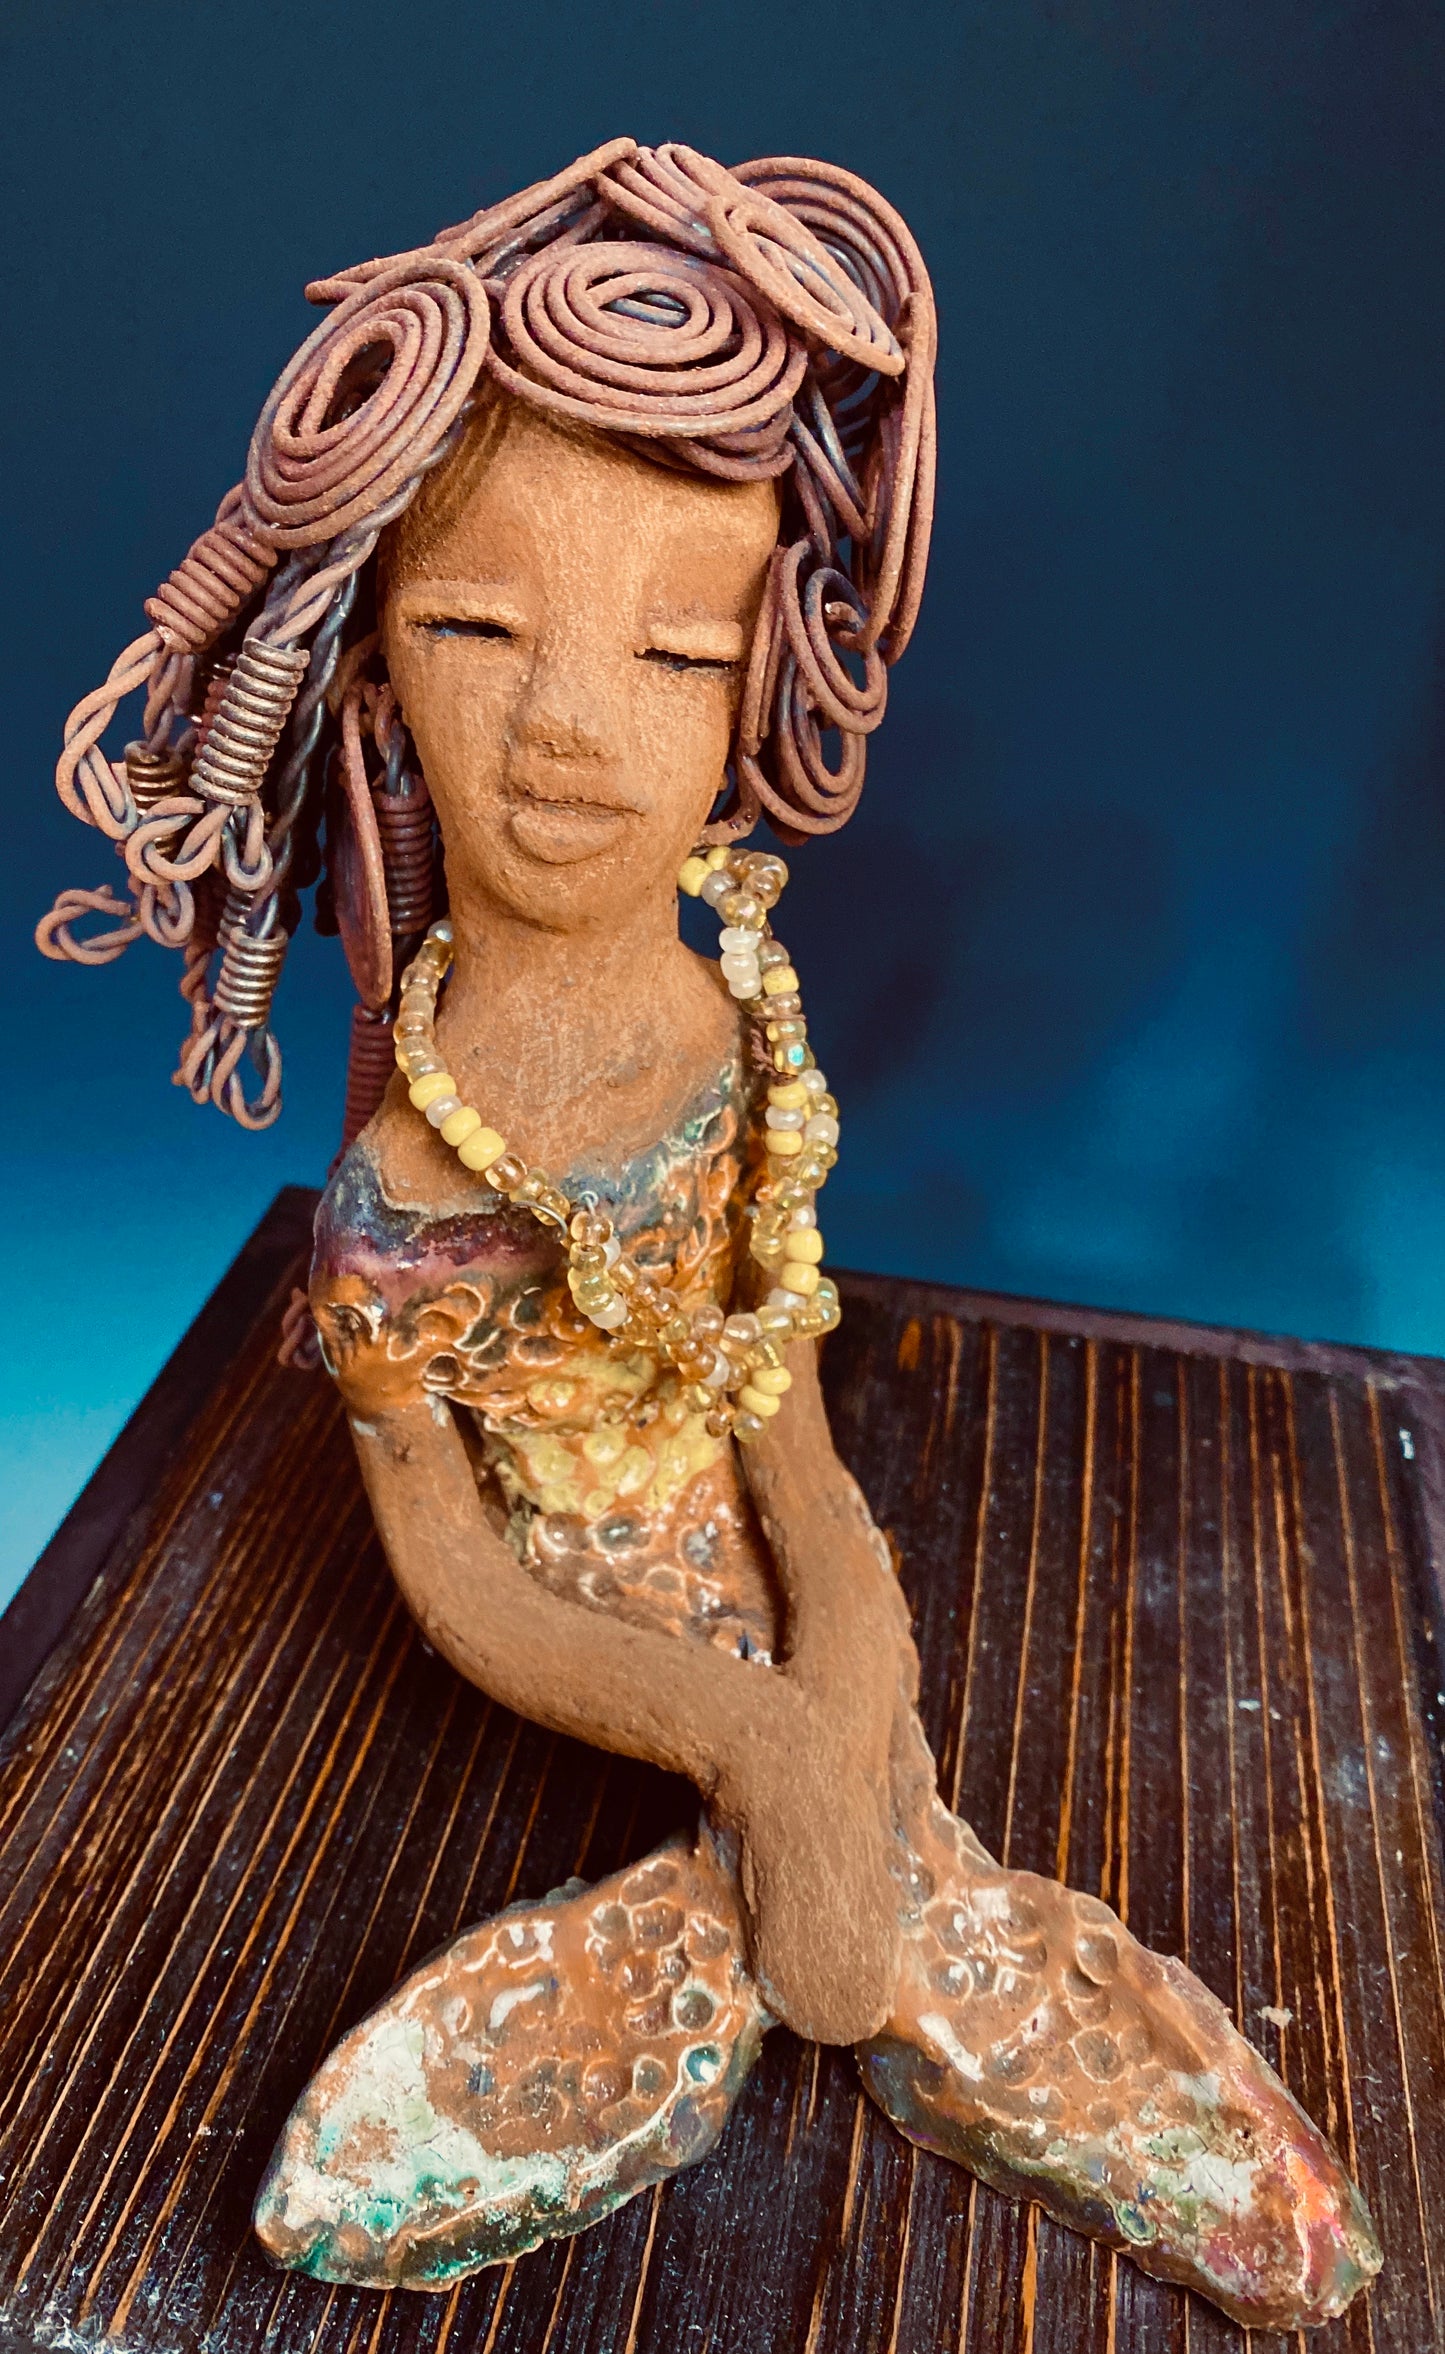 Meet Isabella the Mermaid! Isabella stands 7' x 4" x 6" and weighs 1.08 lbs.. Isabella  has a lovely brown complexion. Her long loving arms are crossed in her lap. Isabella has over 20 feet of  wire hair. It took over two hours to fix her hair! Isabella has a metallic yellow swimsuit with flashes of copper. She wears a yellow beaded necklace. Isabella appears to have something on her mind! Give Isabella a special space in your home!